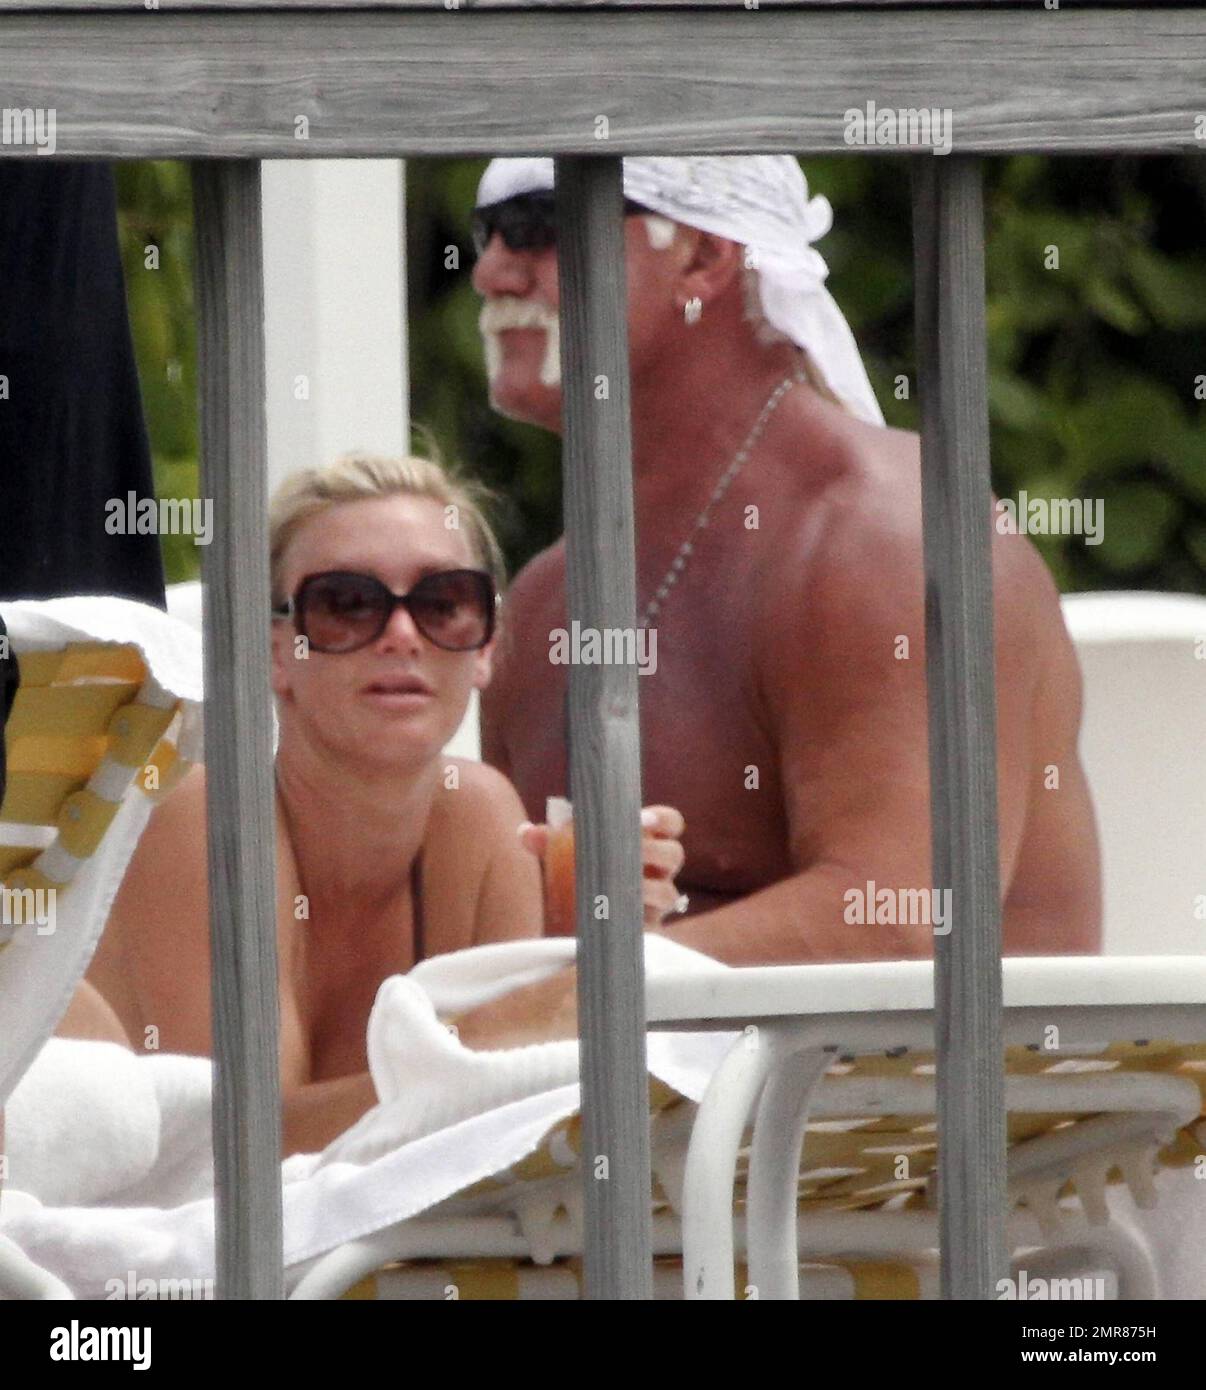 EXCLUSIVE!! Hulk Hogan spends the day poolside with his daughter Brooke and girlfriend Jennifer McDaniel. Brooke Celebrated her 22nd birthday 3 days ago. The Trio soaked up the sun and enjoyed a water-front lunch and drinks. Miami, FL. 5/8/10. Stock Photo